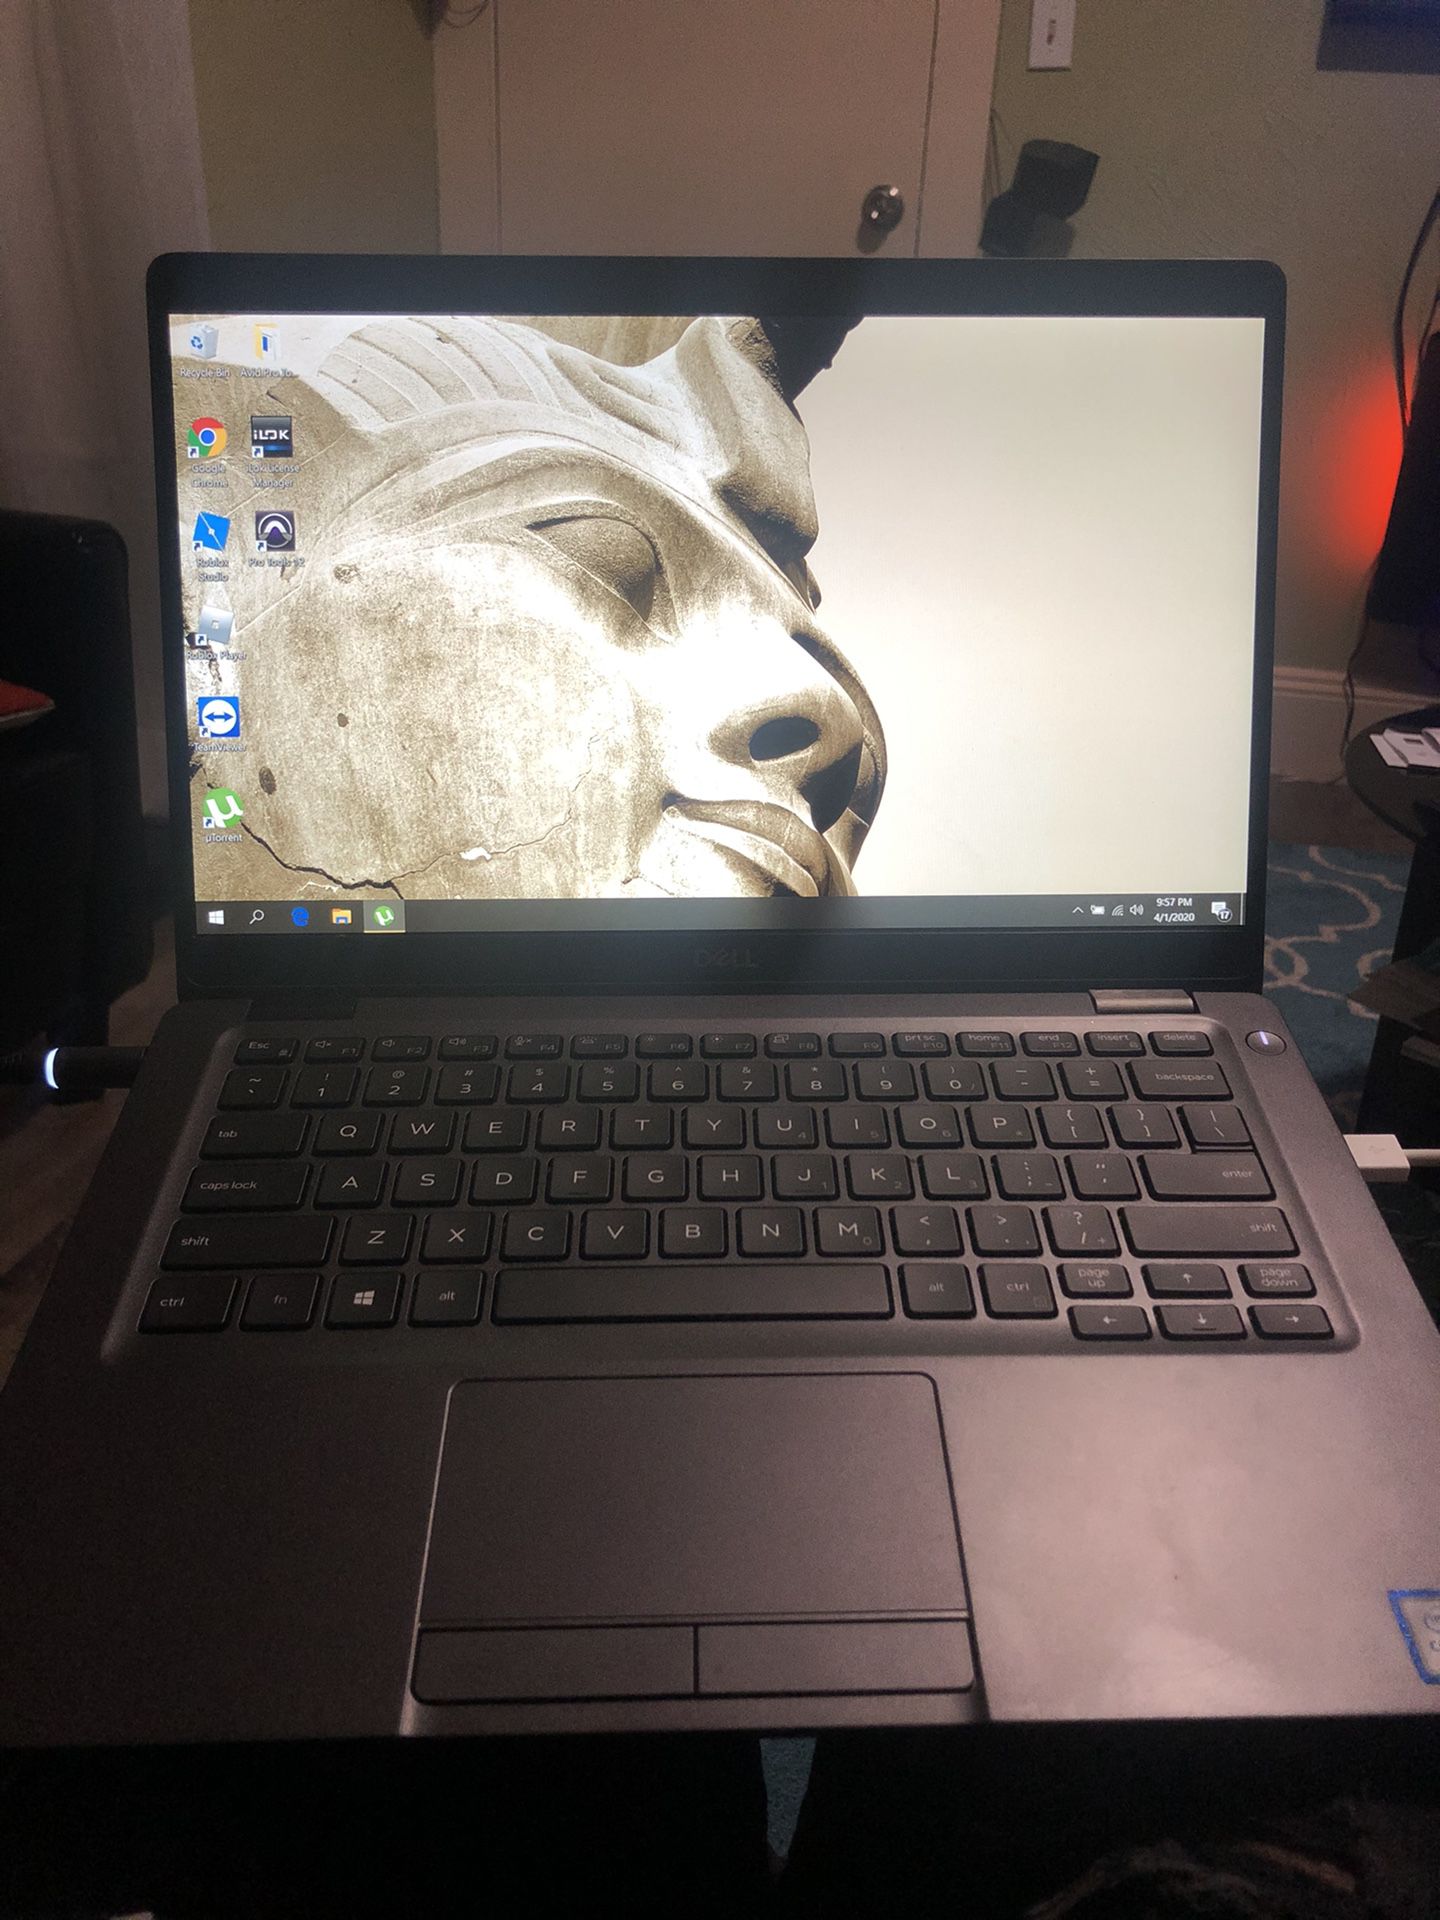 Dell 5300 (2019) for sale!! W/Protools 12 installed